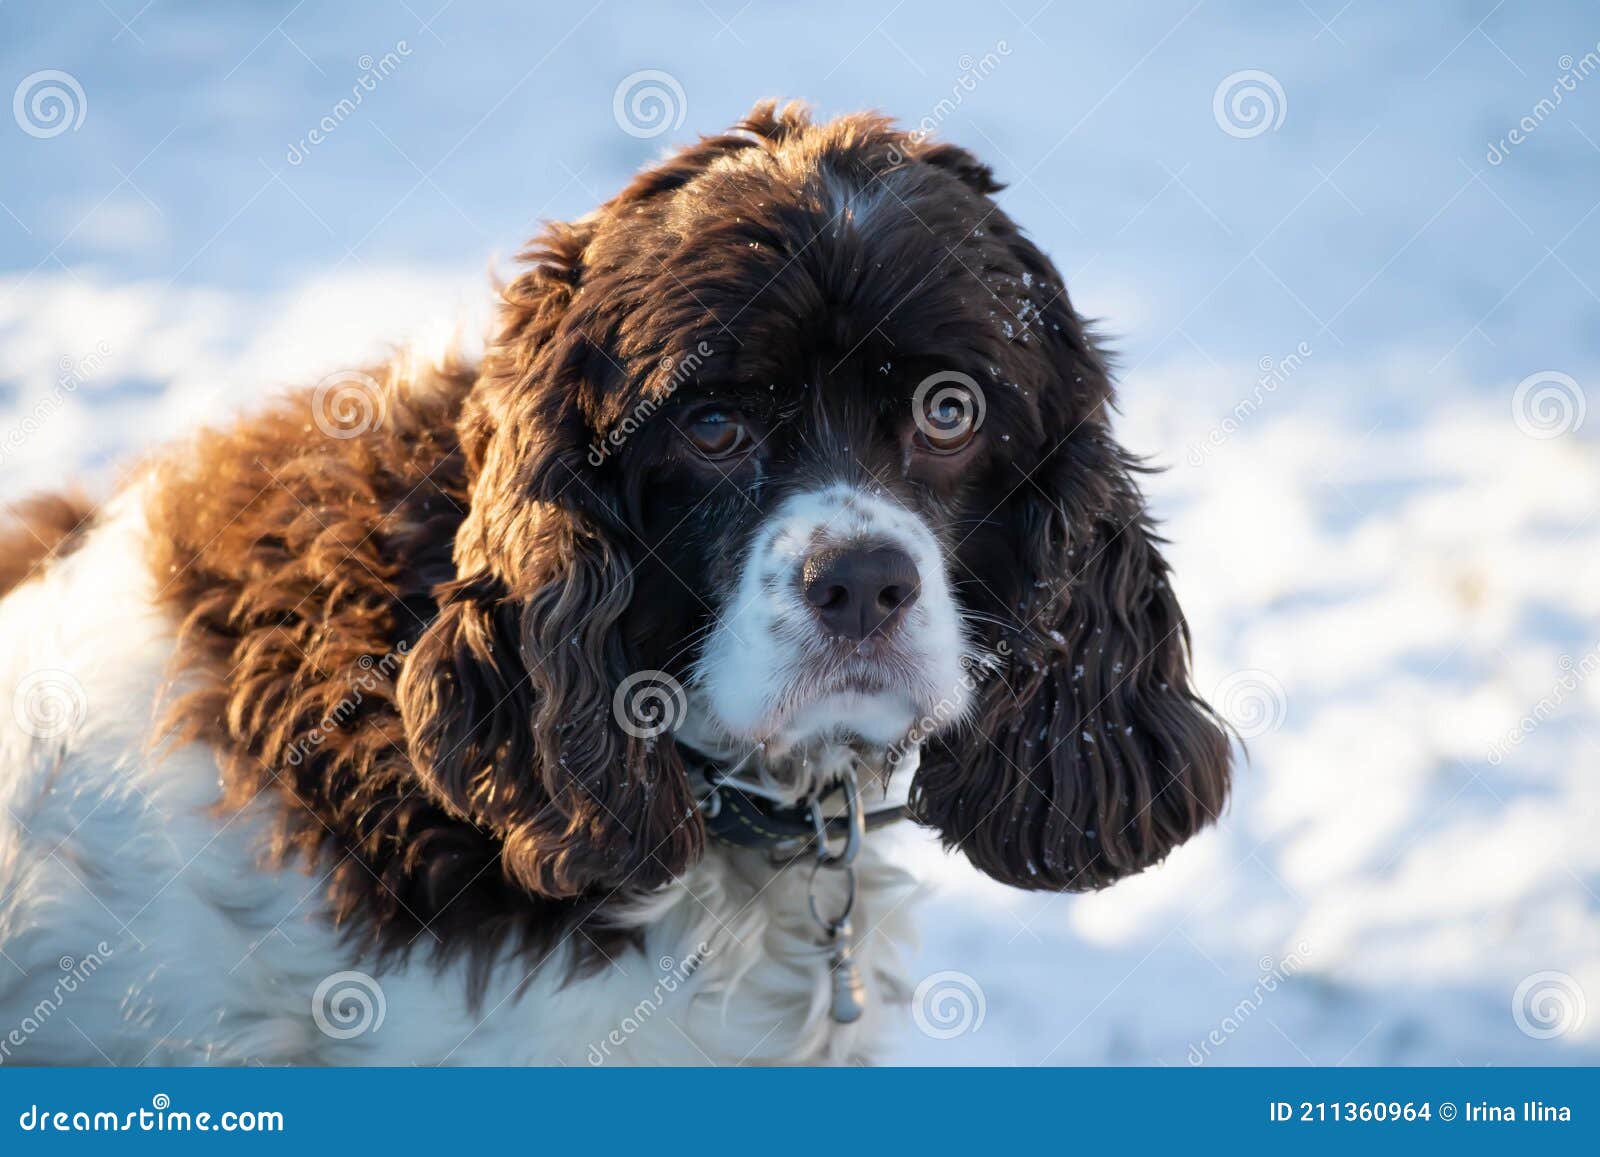 Springer and Cocker Spaniel Dog Muzzle Close-up Portrait. Long Ears in a  Hunting Dog Stock Photo - Image of adorable, face: 211360964